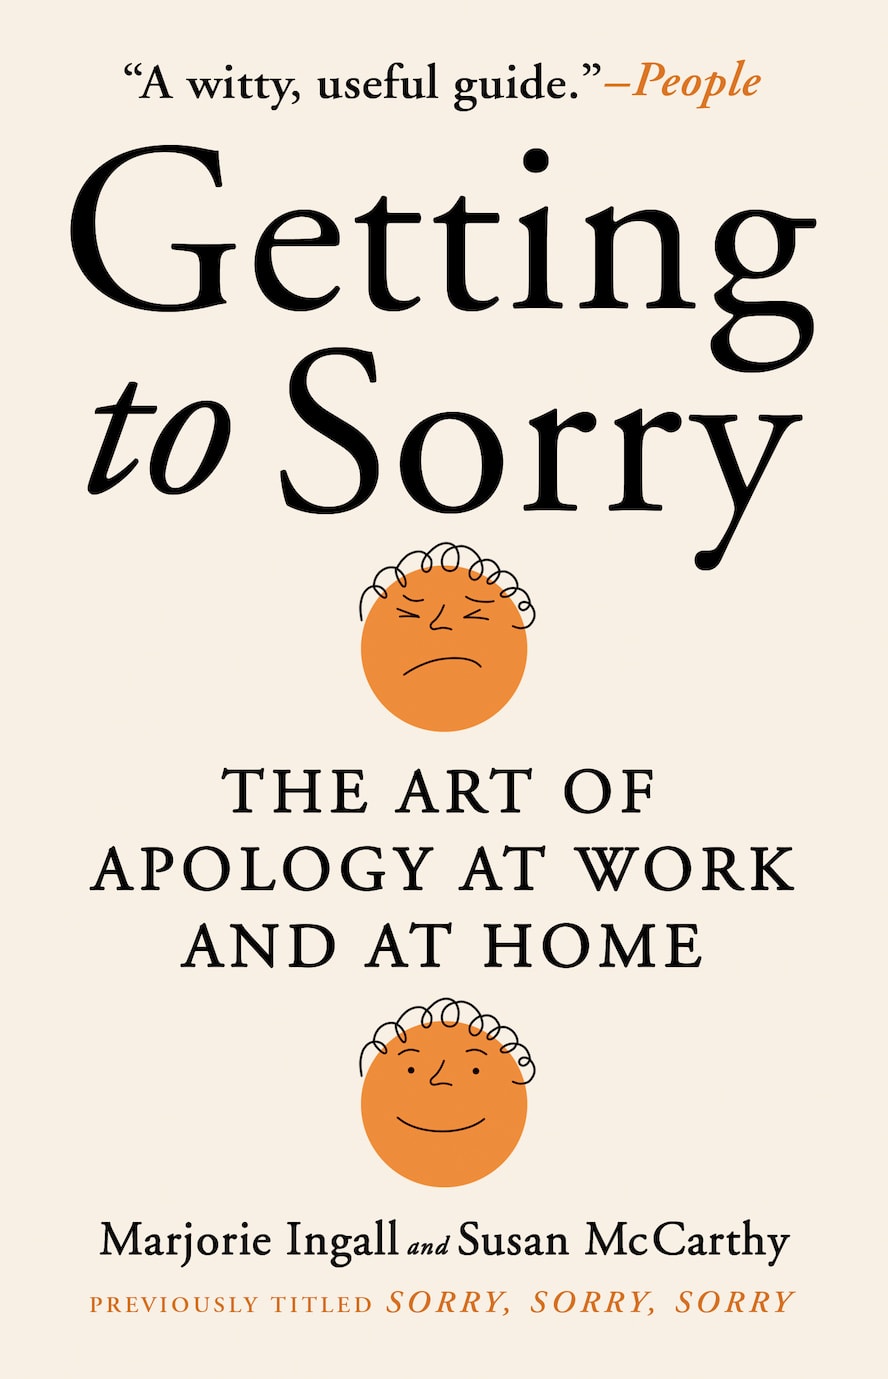 Beige cover of Getting to Sorry: The Art of Apology at Work and at Home, by Marjorie Ingall and Susan McCarthy. There are two orange circles with a squiggly line indicating hair; one circle is scowling and one is smiling. There is also a blurb/cover line from People magazine's review, calling the book "a witty, useful guide." And in little orange letters at the bottom, it says "Previously titled Sorry, Sorry, Sorry."